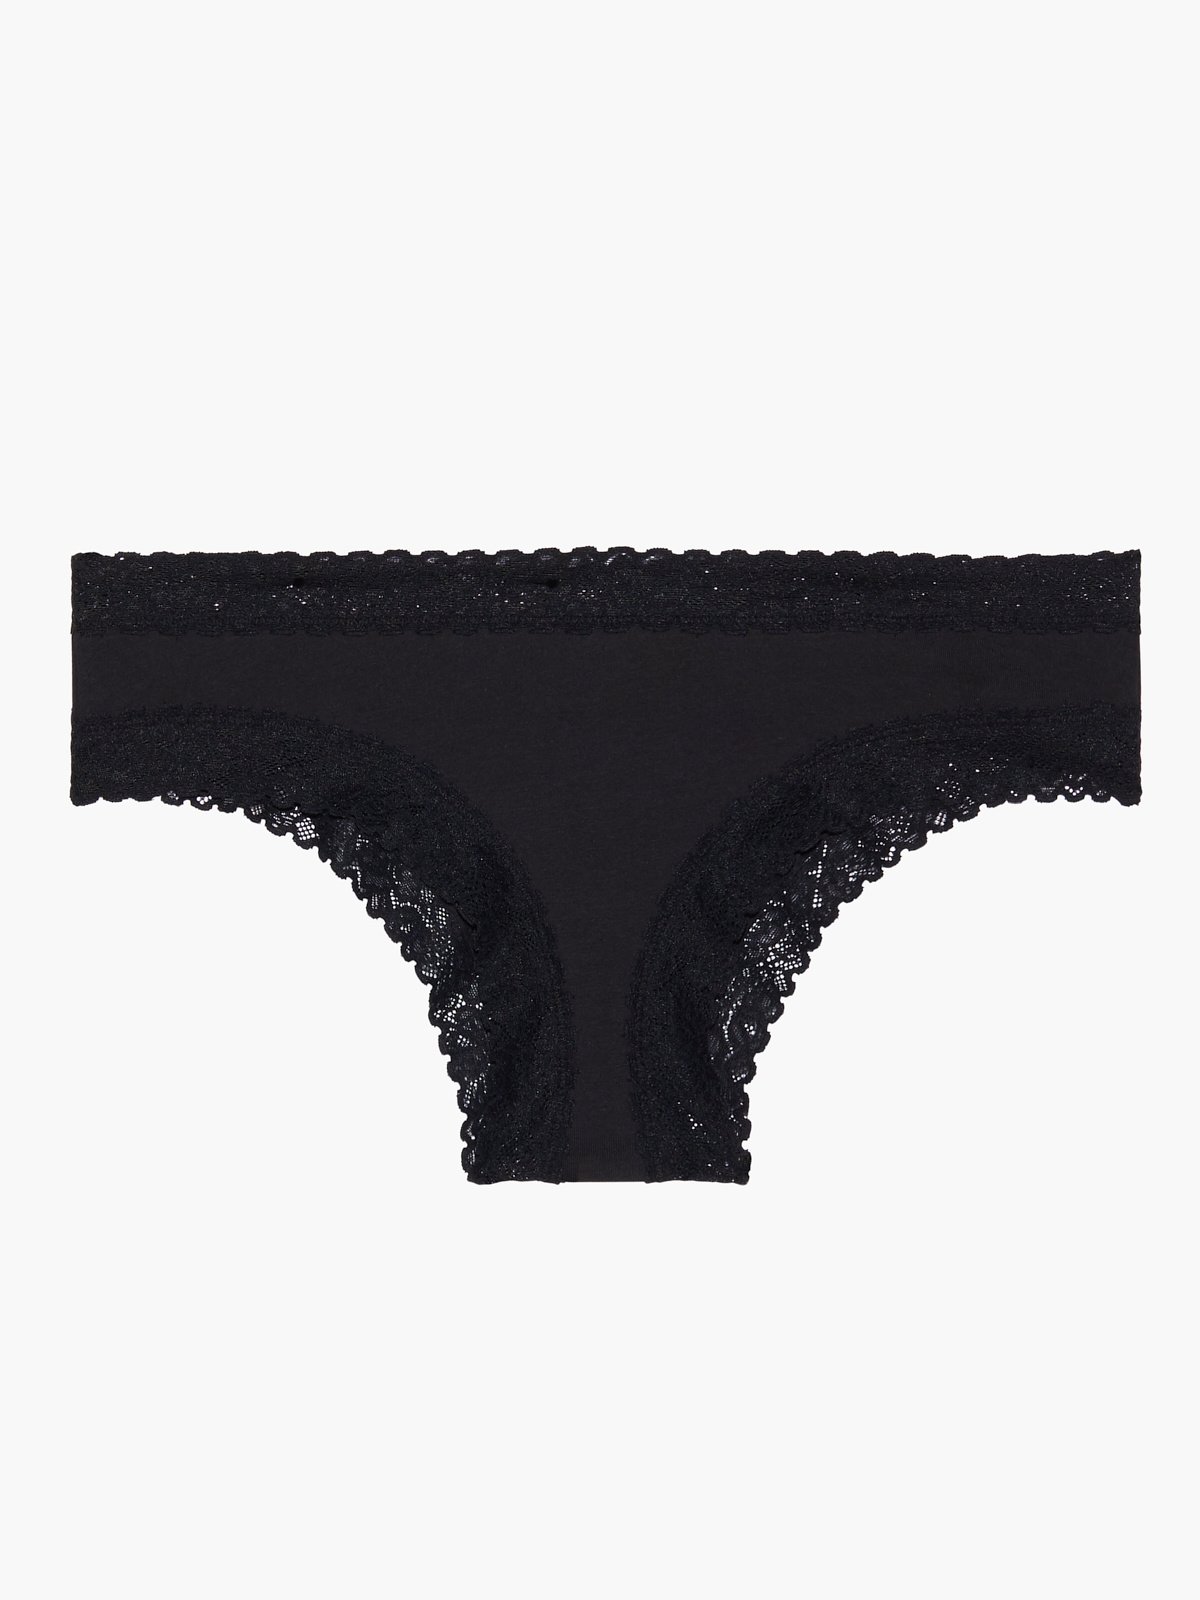 Cotton Essentials Lace-Trim Cheeky Panty in Black